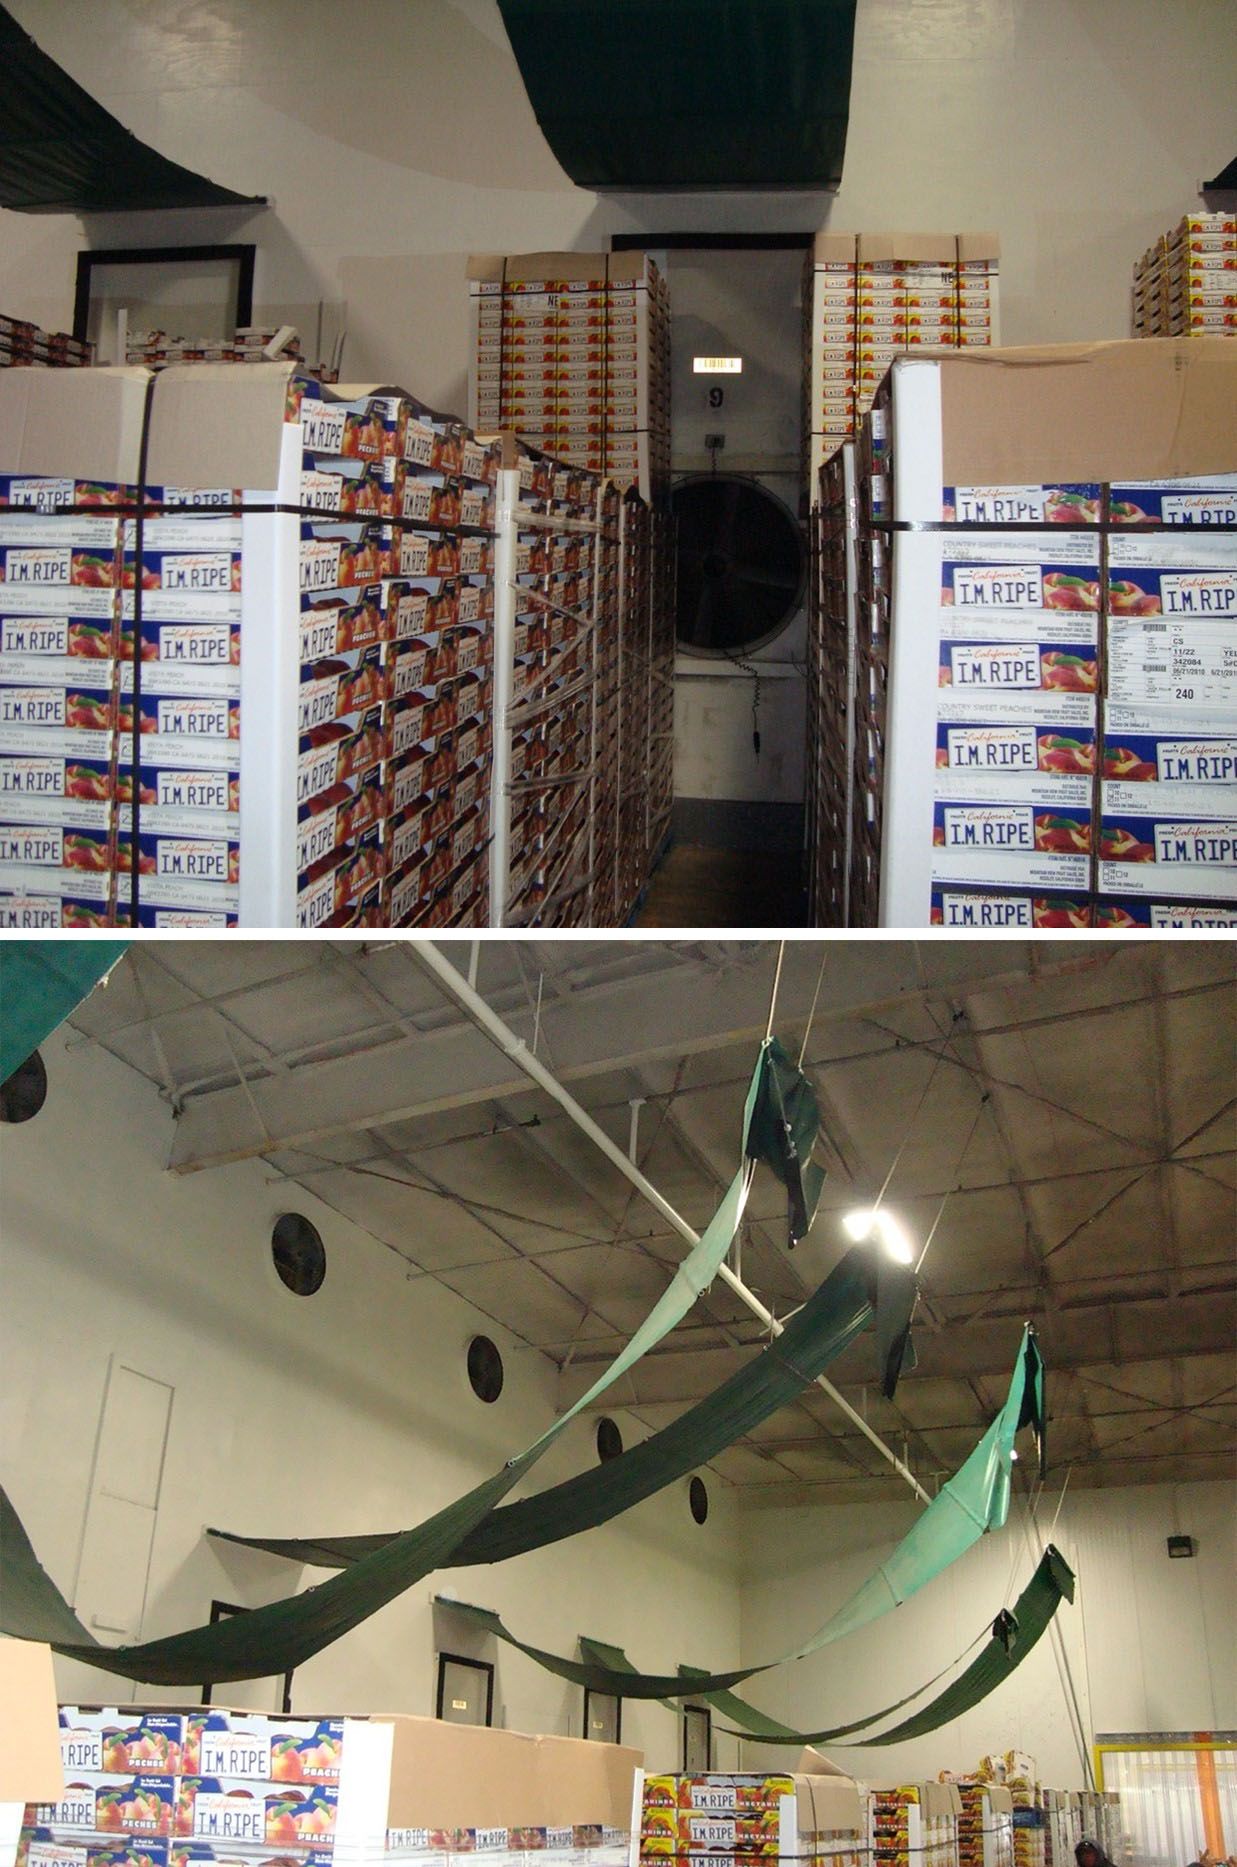  Forced-air cooling of peaches in palletized shipping cartons. The pallets have been aligned in rows on either side of fans set into the cold room wall to form the cooling tunnels, prior to lowering the tarps and turning on the fans to begin forced-air cooling. 